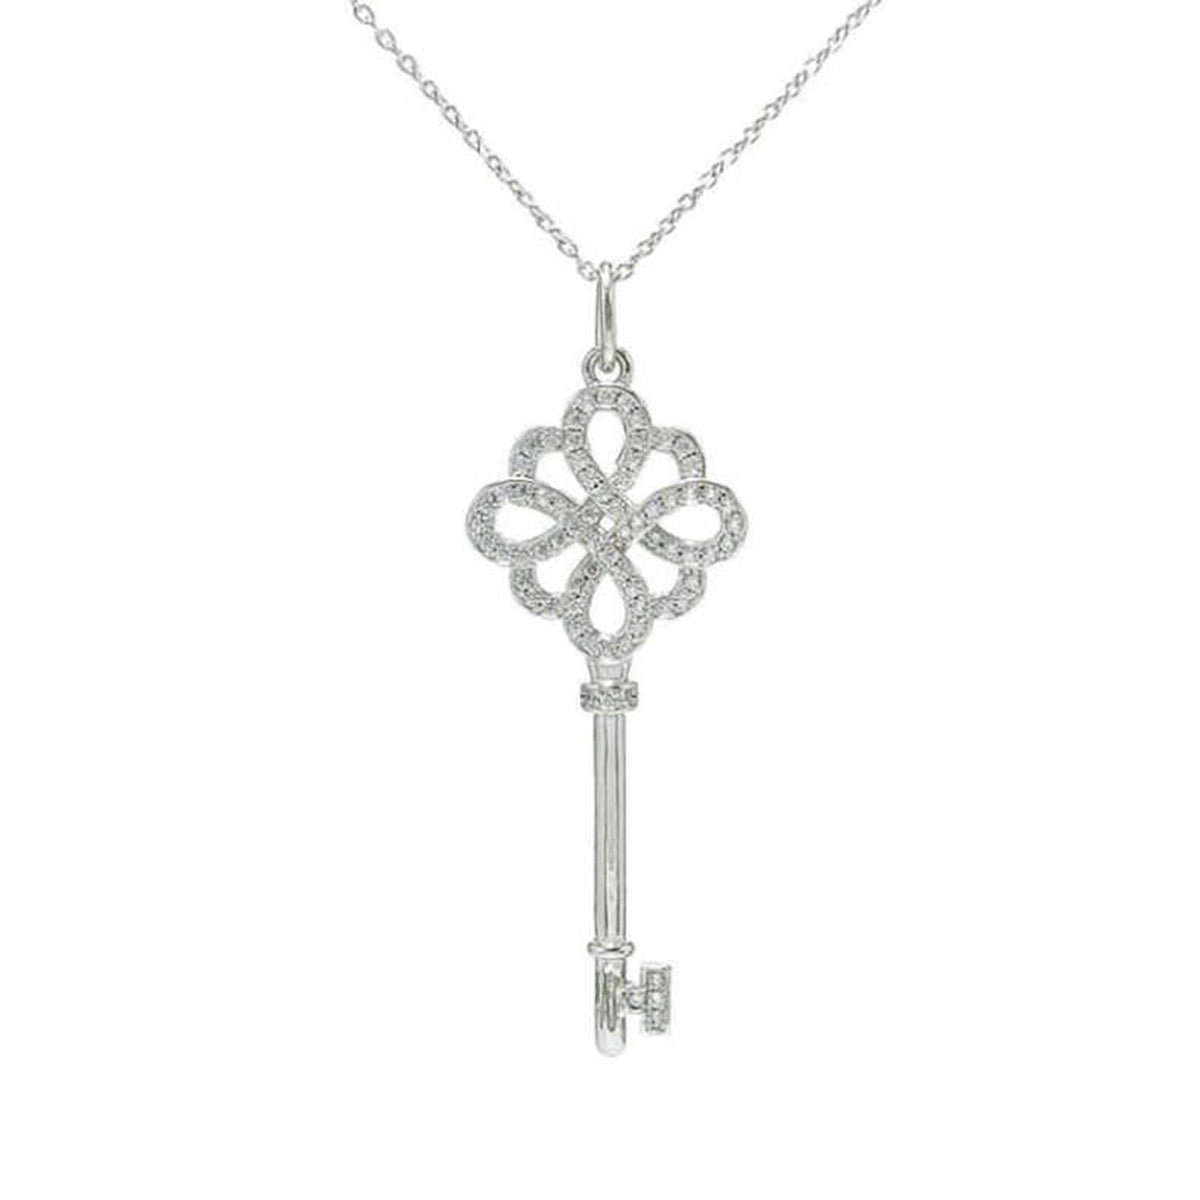 Sterling Silver Four-leaf Clover Key Shape Pendant with Full Stones